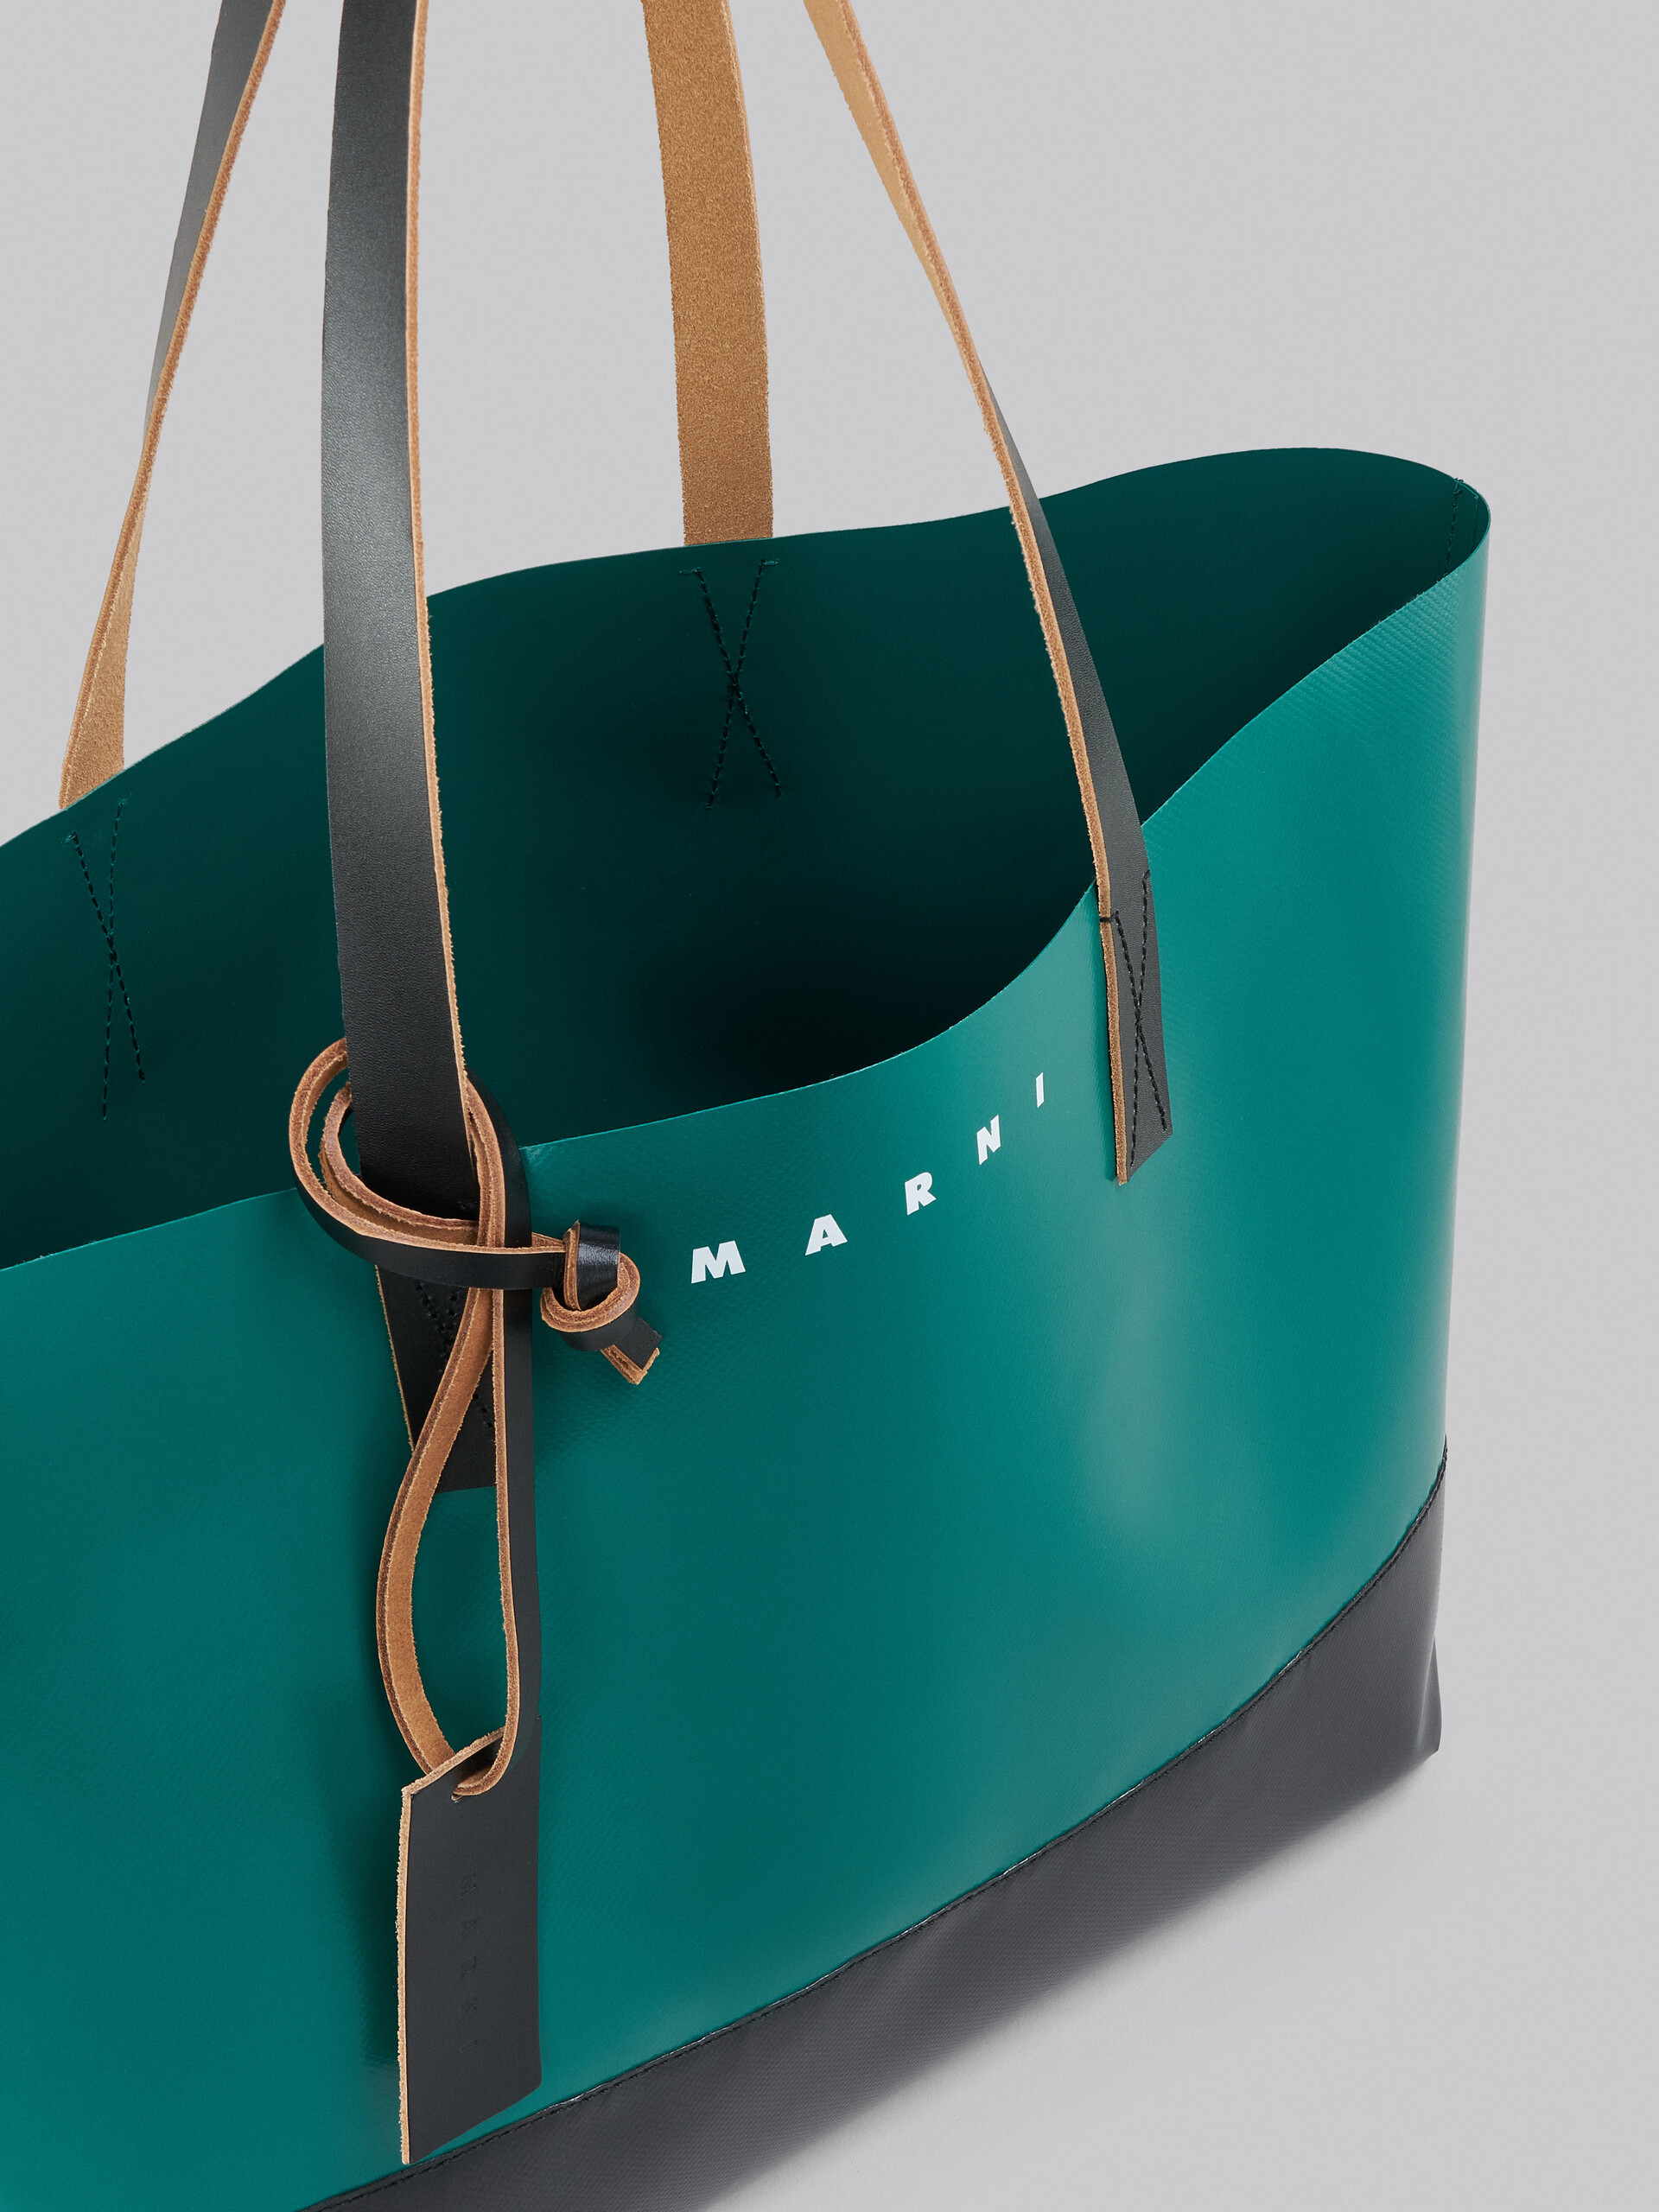 Tribeca shopping bag in green and black - Shopping Bags - Image 4